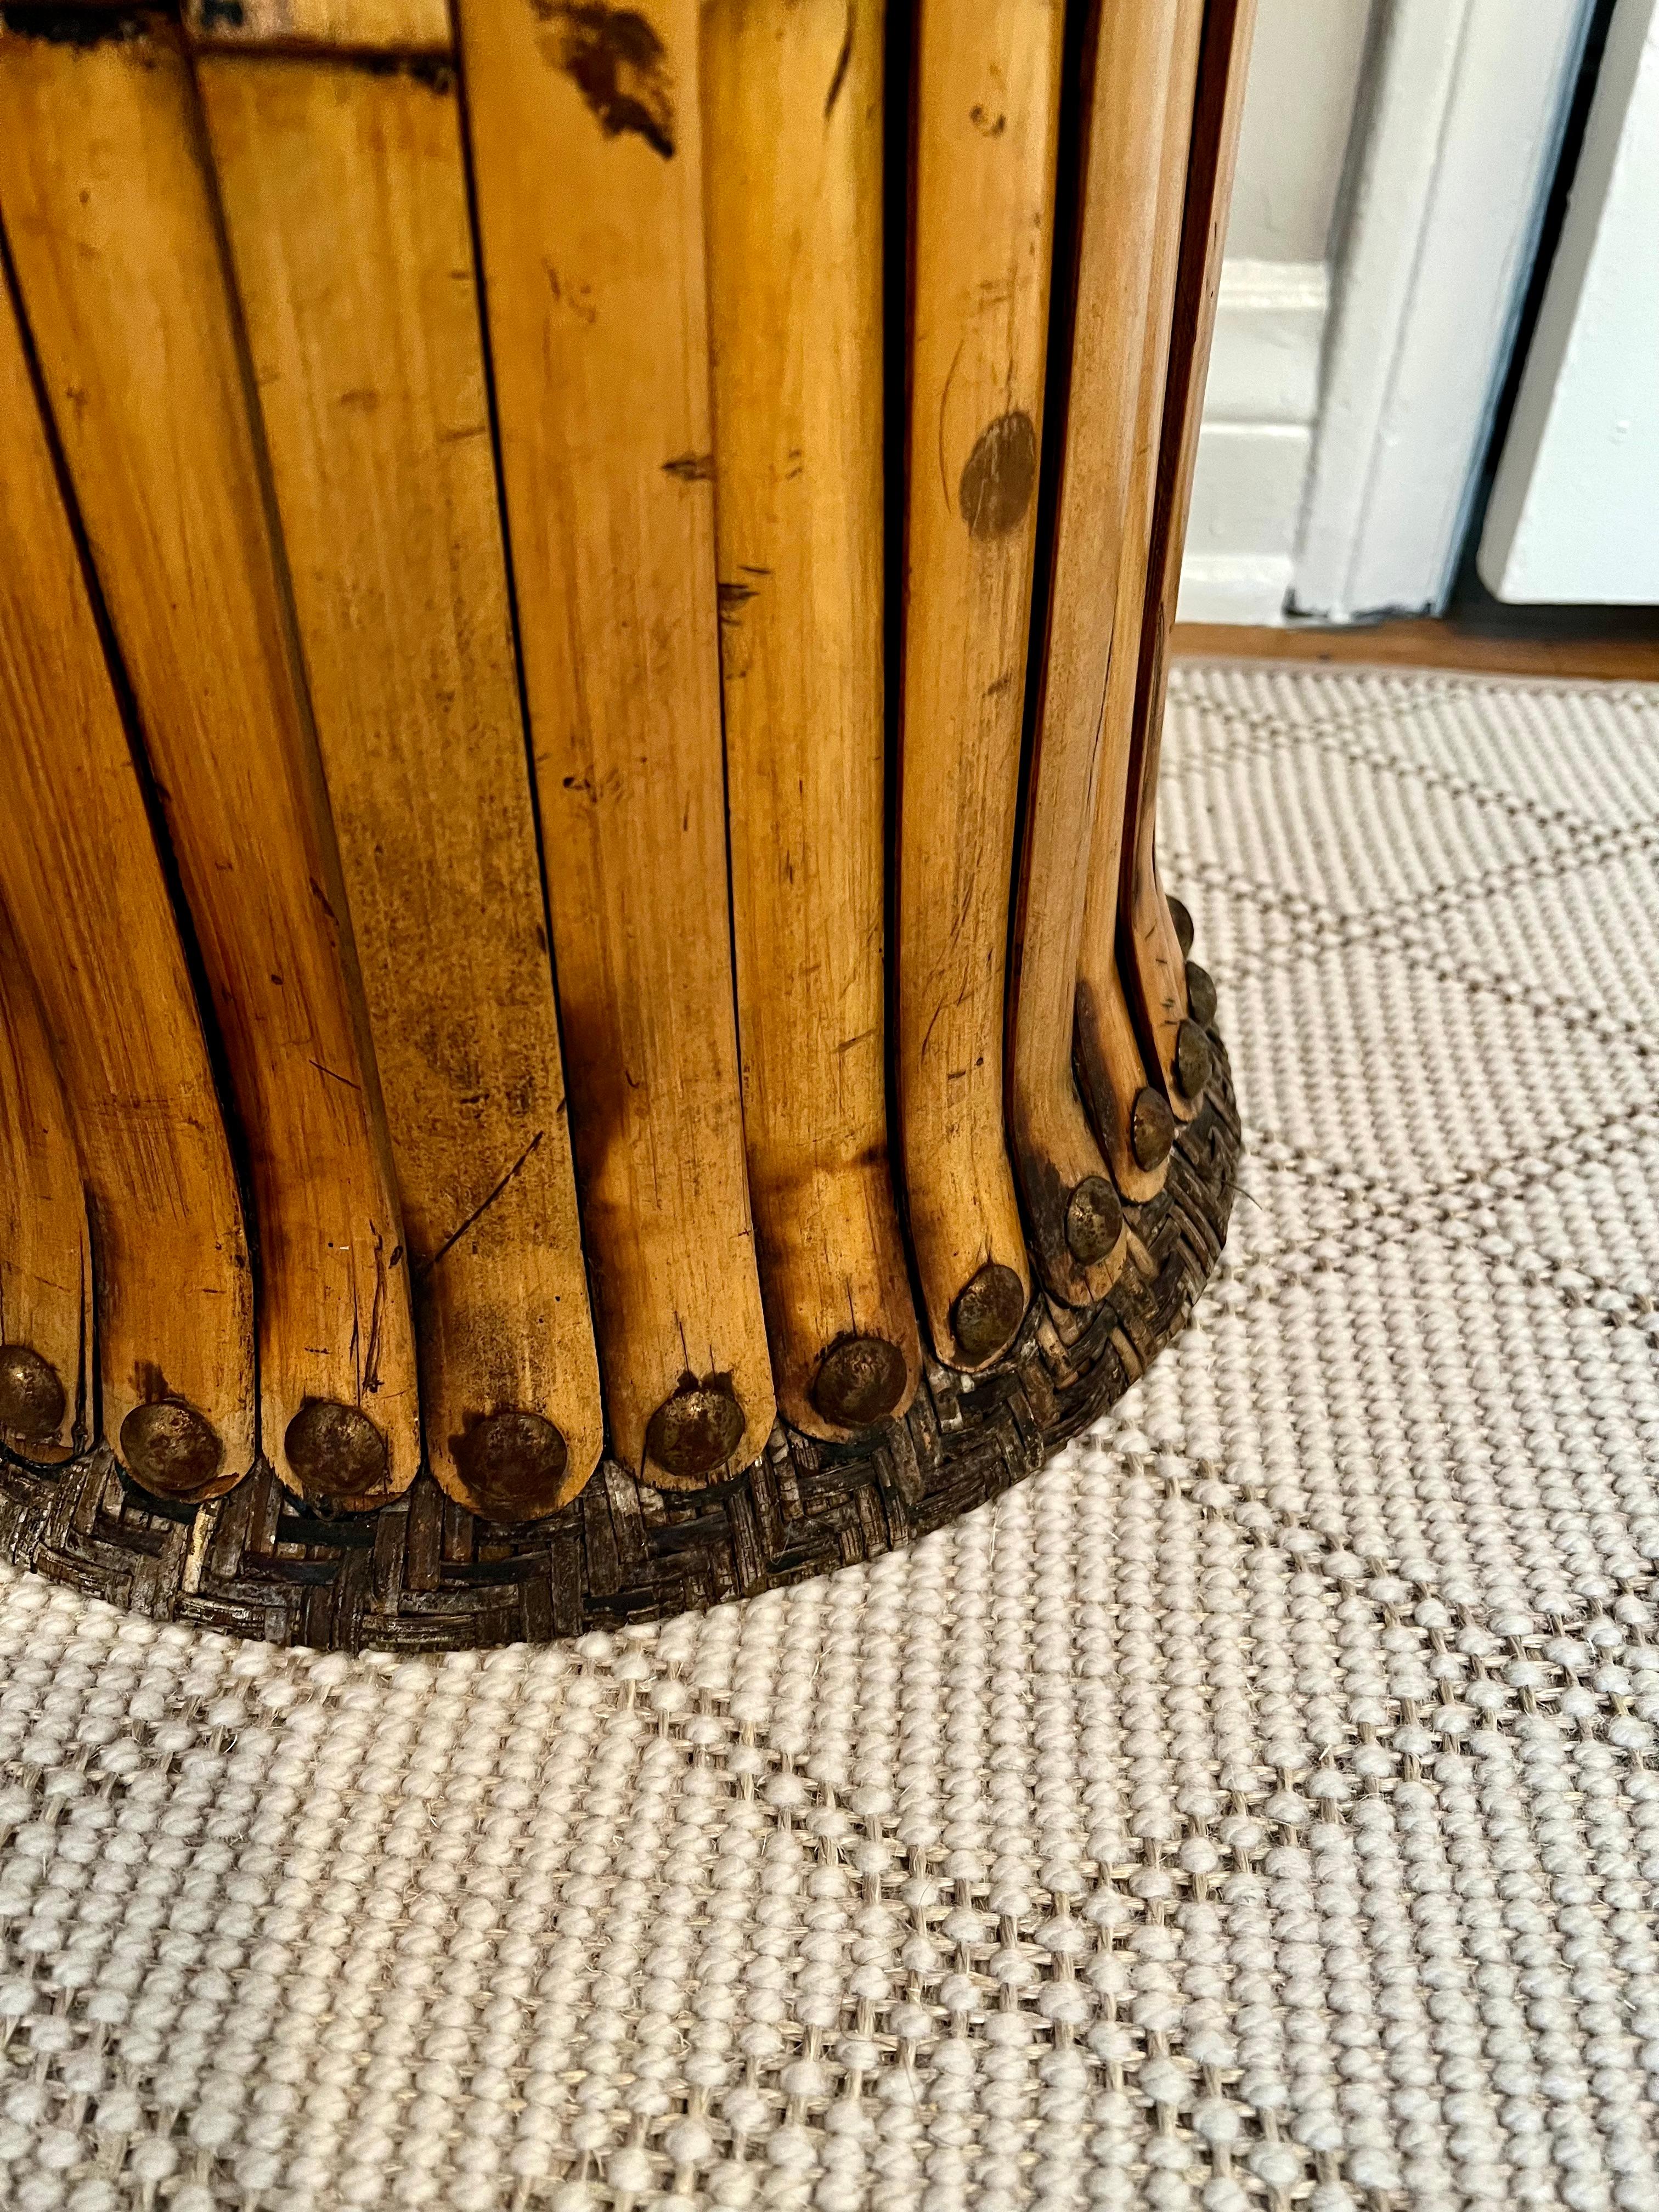 Asian Bent Bamboo Side Table with Woven Grass Inside and Nail Head Details For Sale